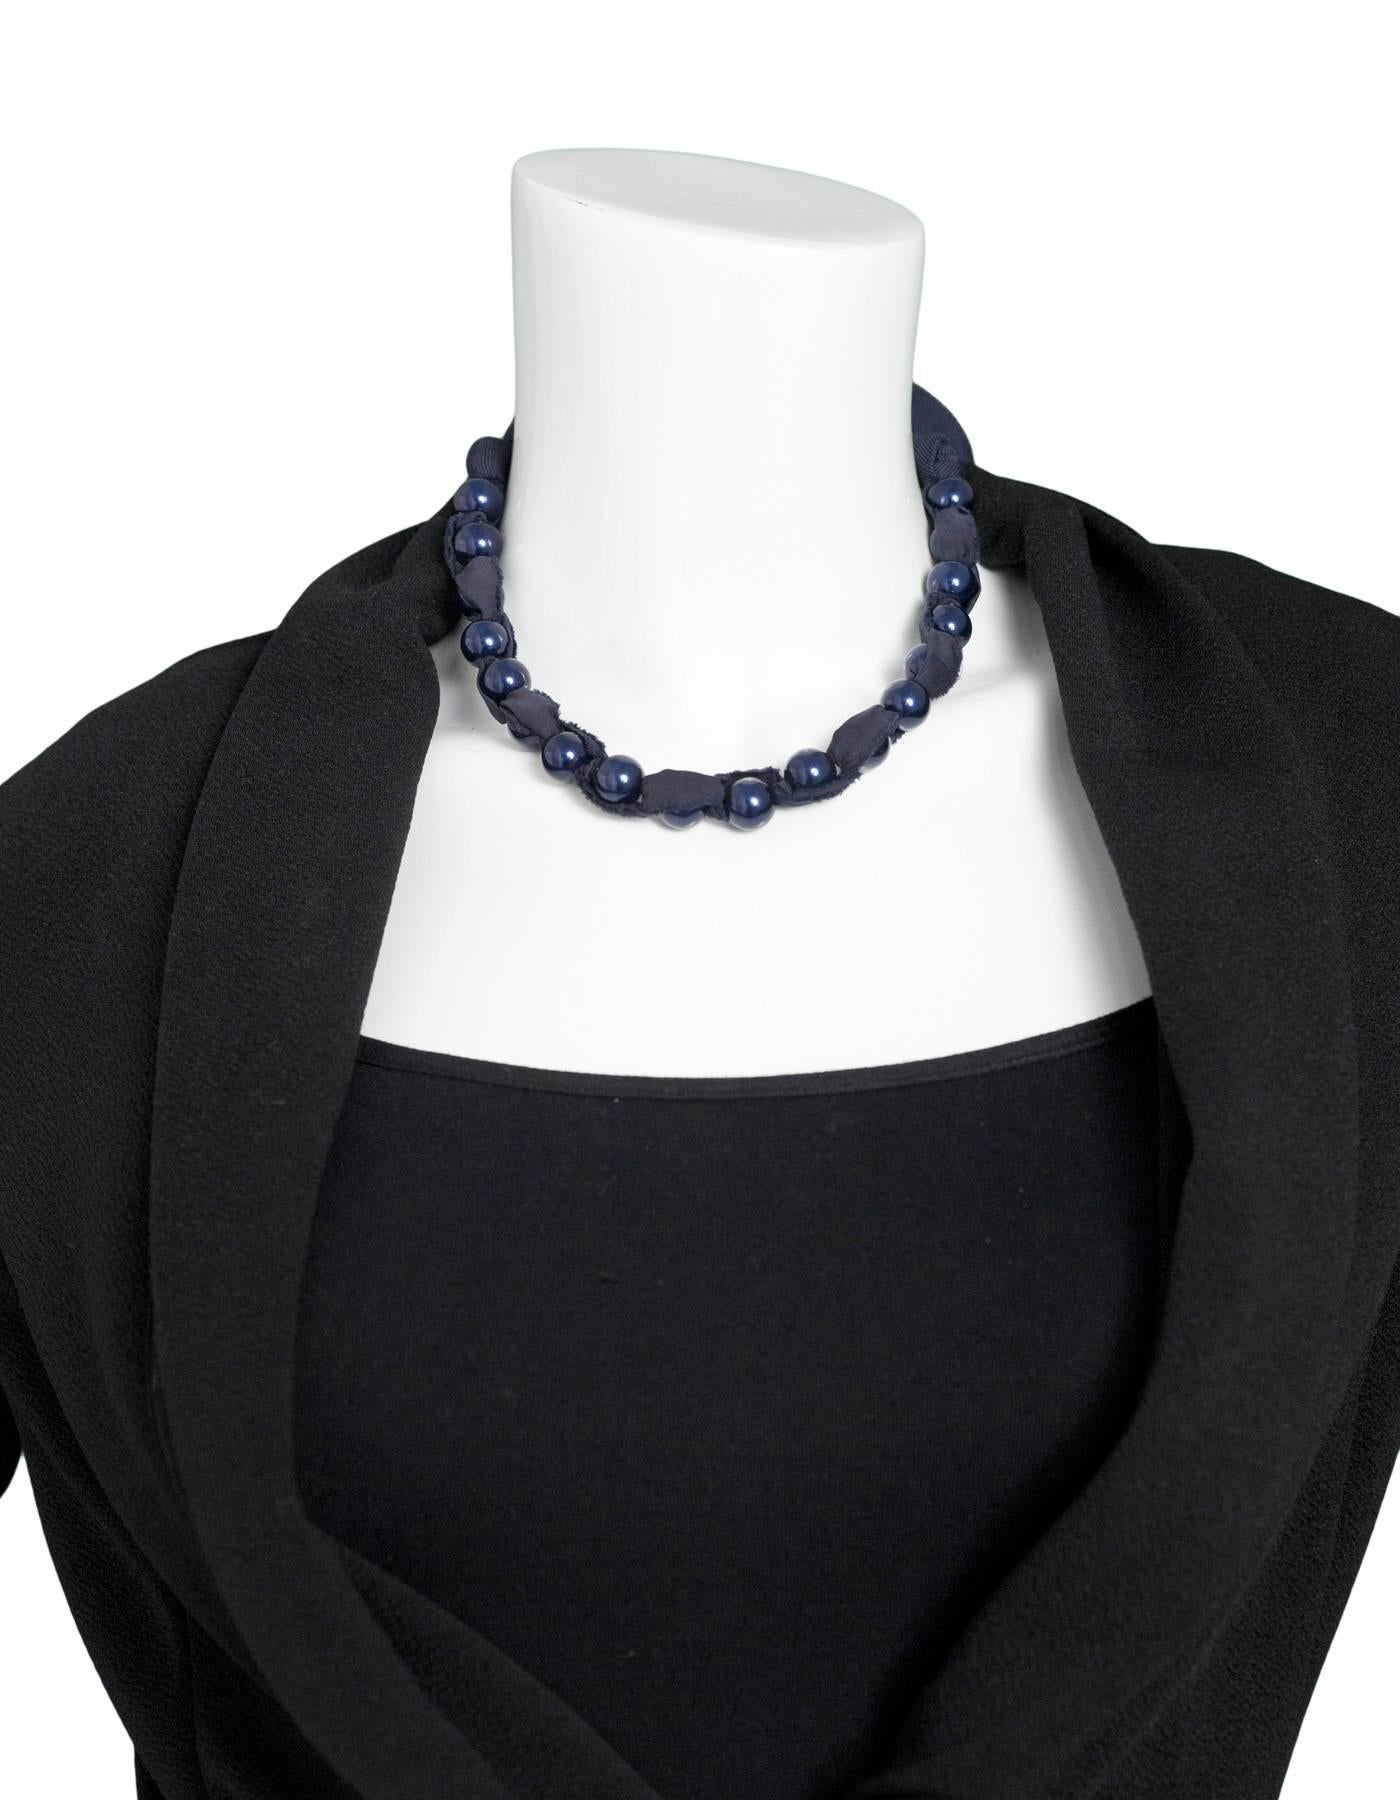 Lanvin Navy Beaded Ribbon Necklace

Color: Navy
Materials: Ribbon, beads
Closure/Opening: Tie closure
Overall Condition: Excellent pre-owned condition
Included: Lanvin dust bag

Measurements: 
Diameter: 27"